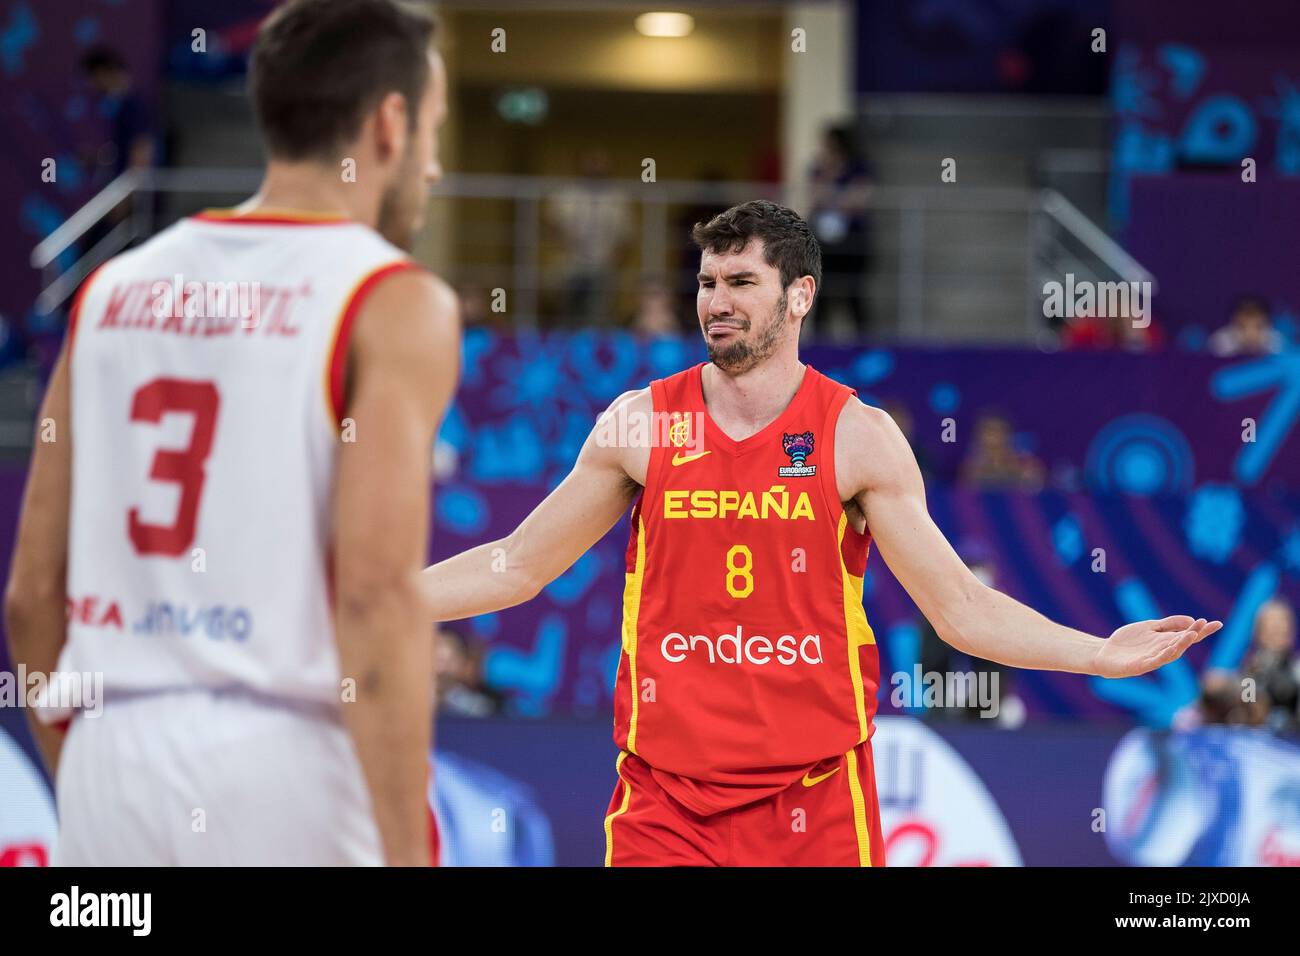 Tbilisi, Georgia, 6th September 2022. Dario Brizuela of Spain reacts during the FIBA EuroBasket 2022 group A match between Montenegro and Spain at Tbilisi Arena in Tbilisi, Georgia. September 6, 2022. Credit: Nikola Krstic/Alamy Stock Photo